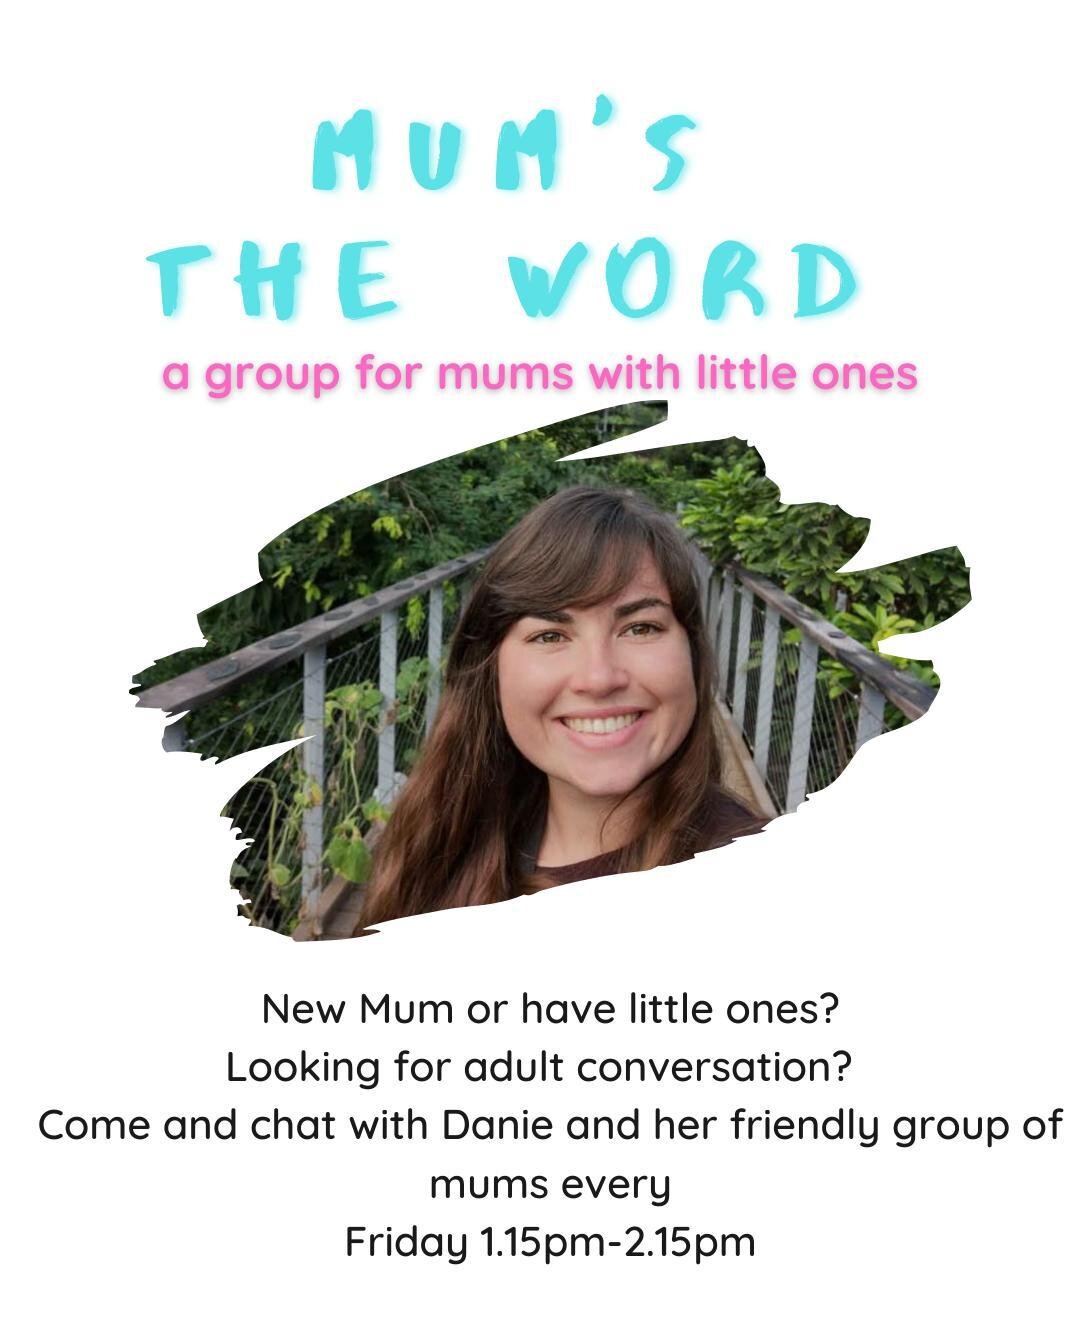 Are you a new mum or have little ones? Looking for other mums to chat and connect with? Join Danie as they meet at the Park each Friday!⁠
⁠
#mums #mumswithlittlesones #lovehemel #dacorum #connect #togetherness #dacorum #hemelhempstead